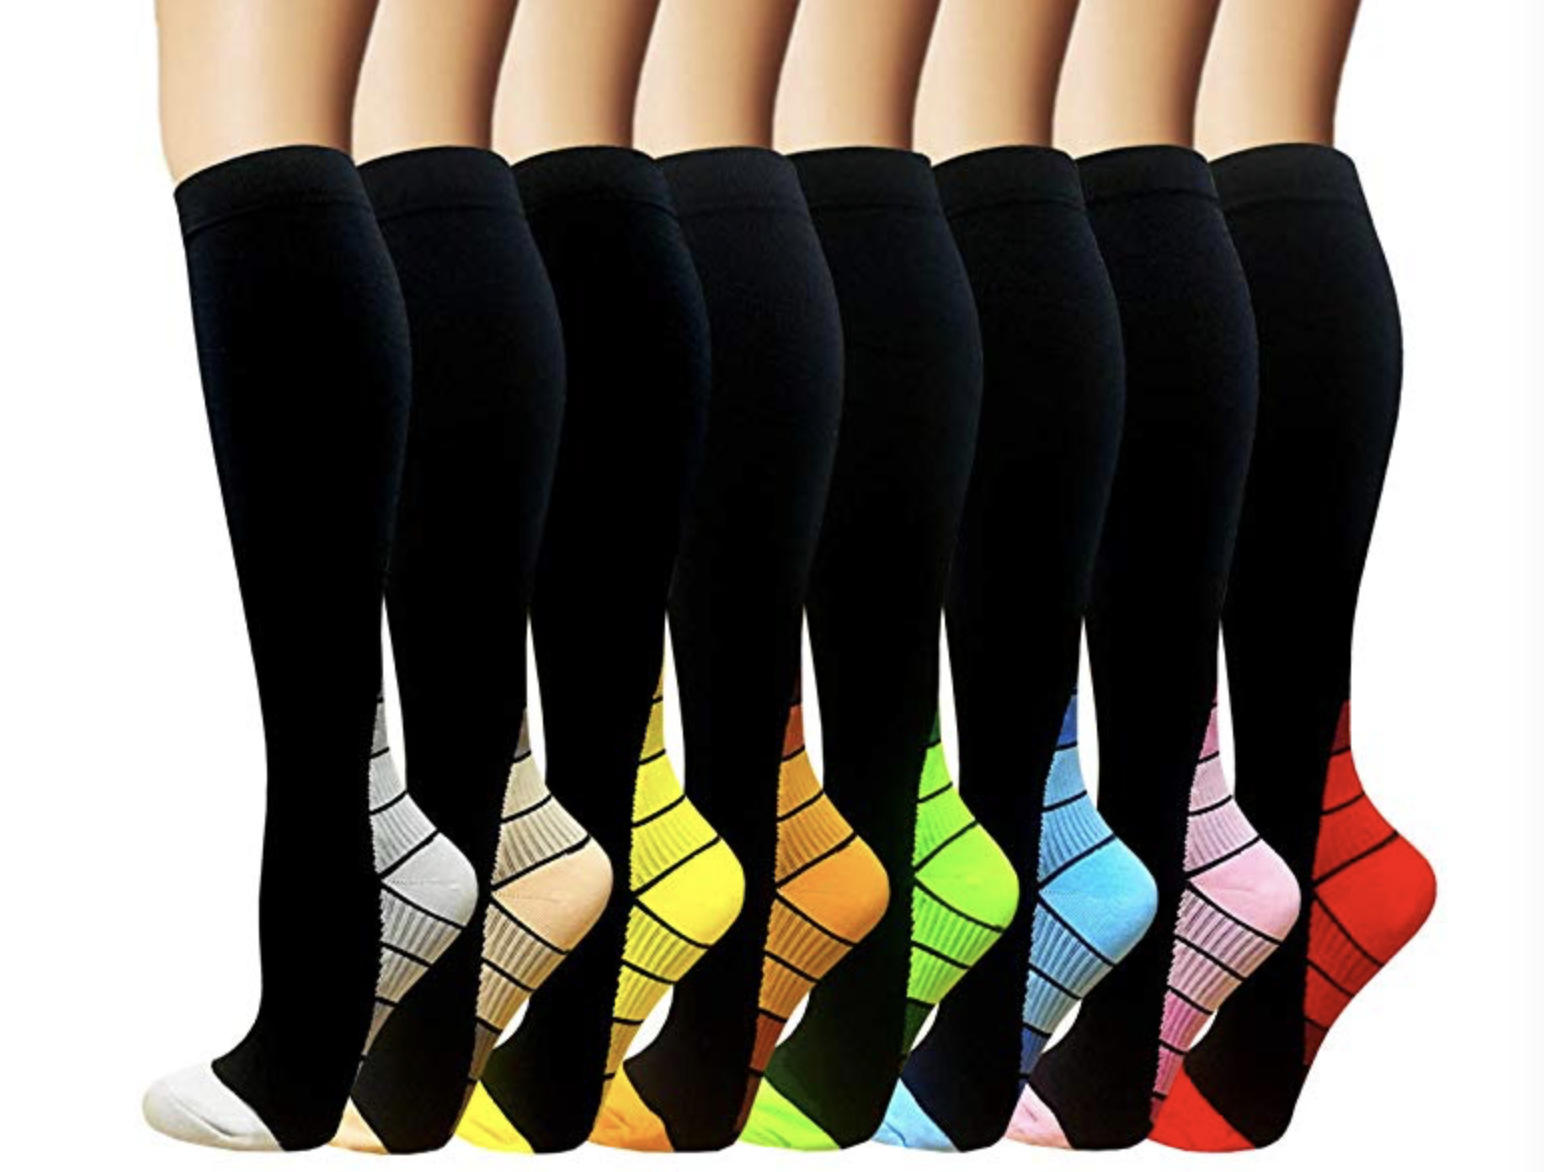 Factory Price Breathable Quality Long Knee High Running Sports Sock Compression Socks